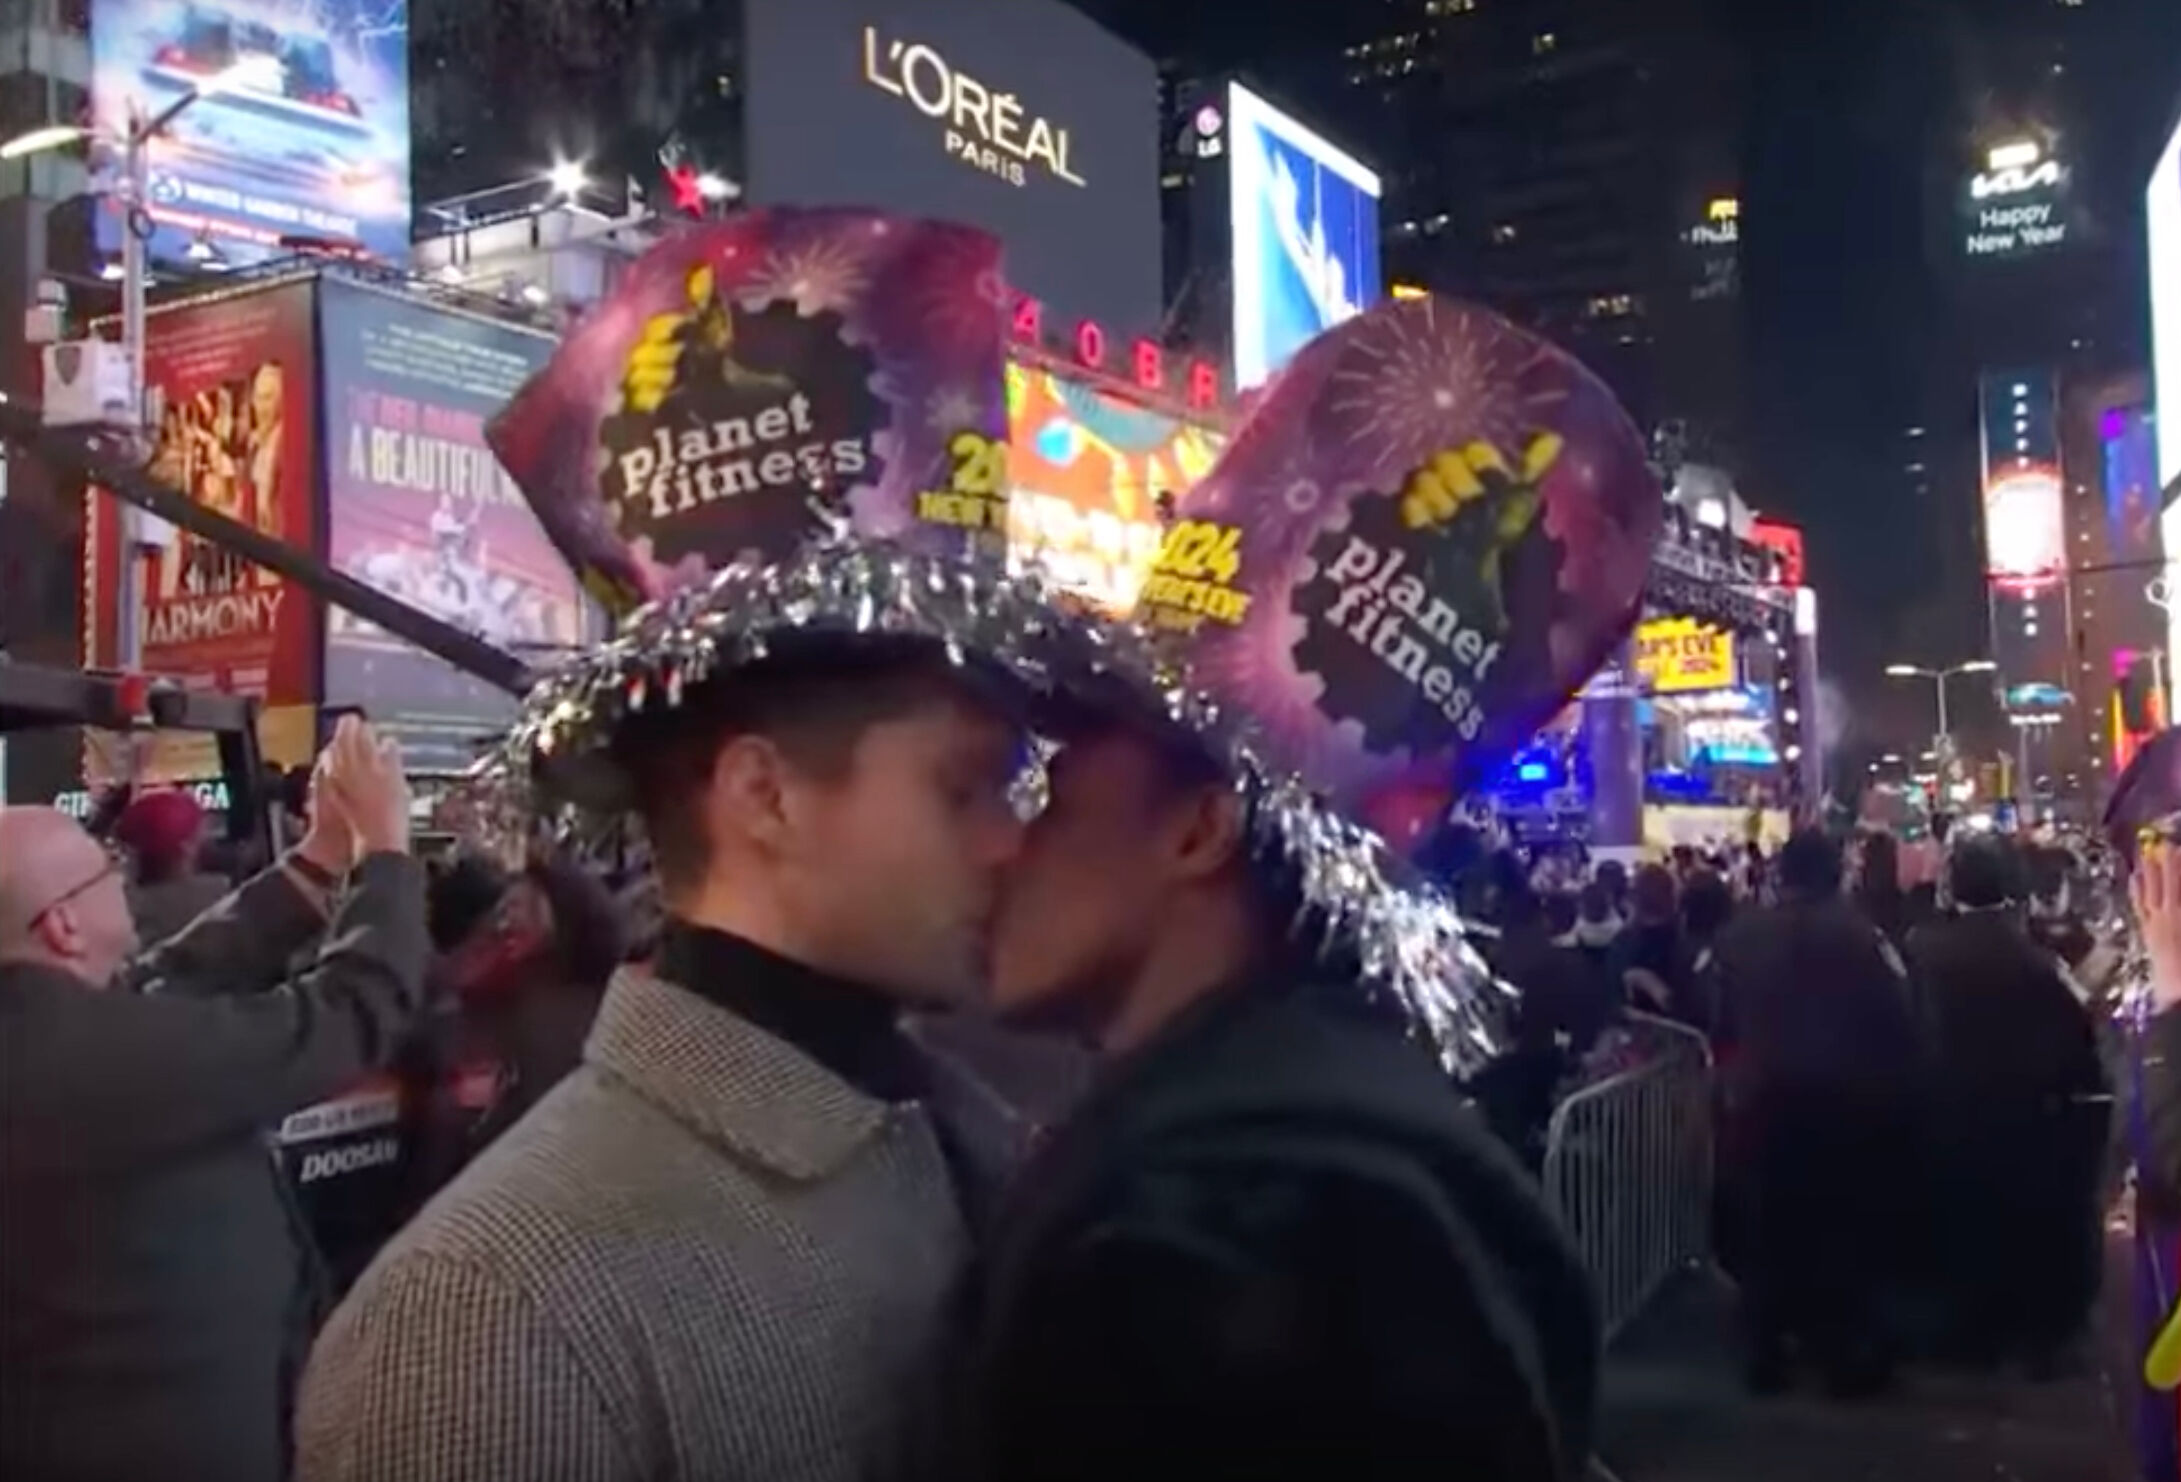 CNN's cameras caught two men kissing at the stroke of midnight on New Year's Eve.